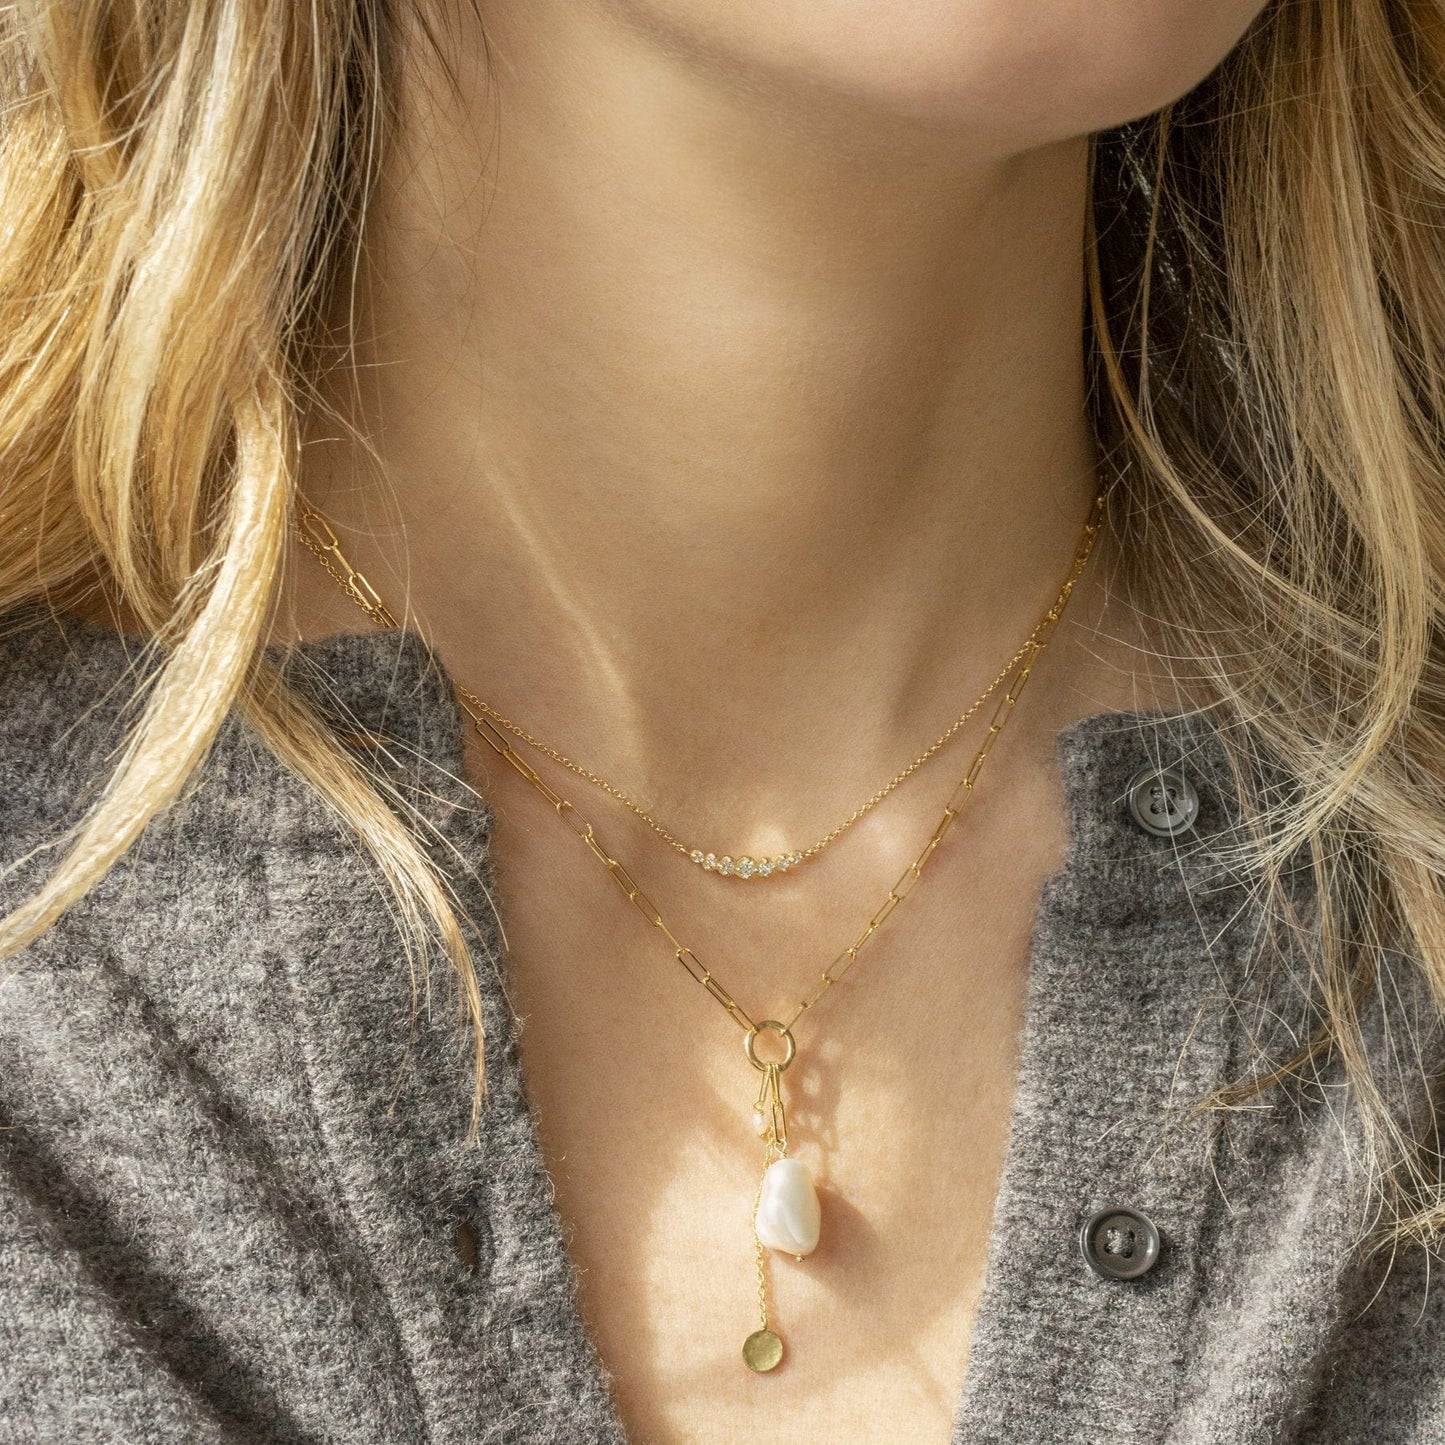 NKL-14K 'Luna' Paperclip and Keshi Nugget Necklace